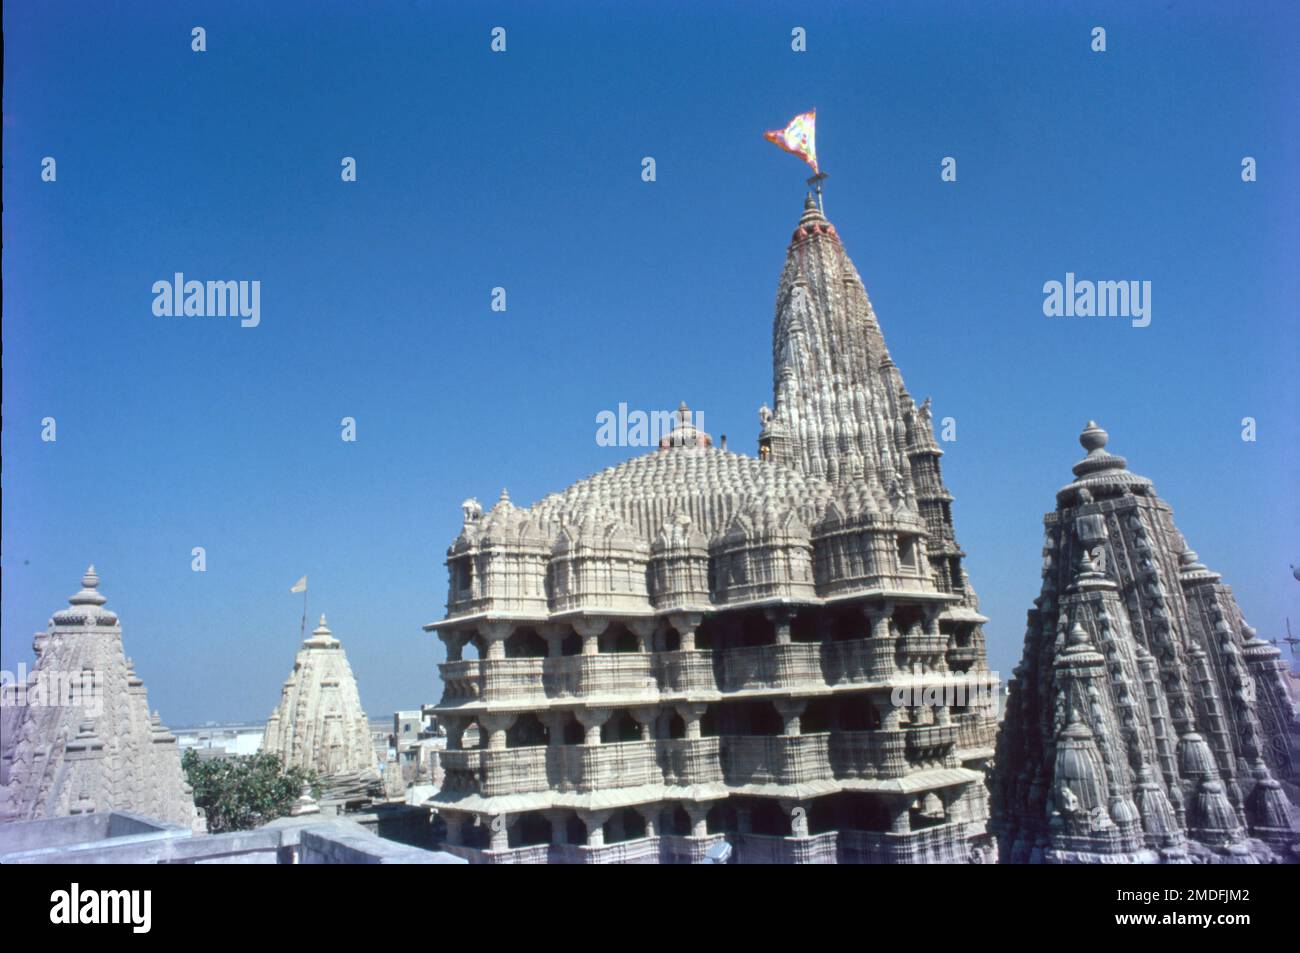 Dwarkadhish Temple, one of the Char Dham pilgrimages, is situated in the city of Dwarka in Gujarat. Dwarka lies on the banks of river Gomti. Dwarkadhish Temple also known as the Jagat Mandir, is a Chalukya styled architecture, dedicated to Lord Krishna. Stock Photo